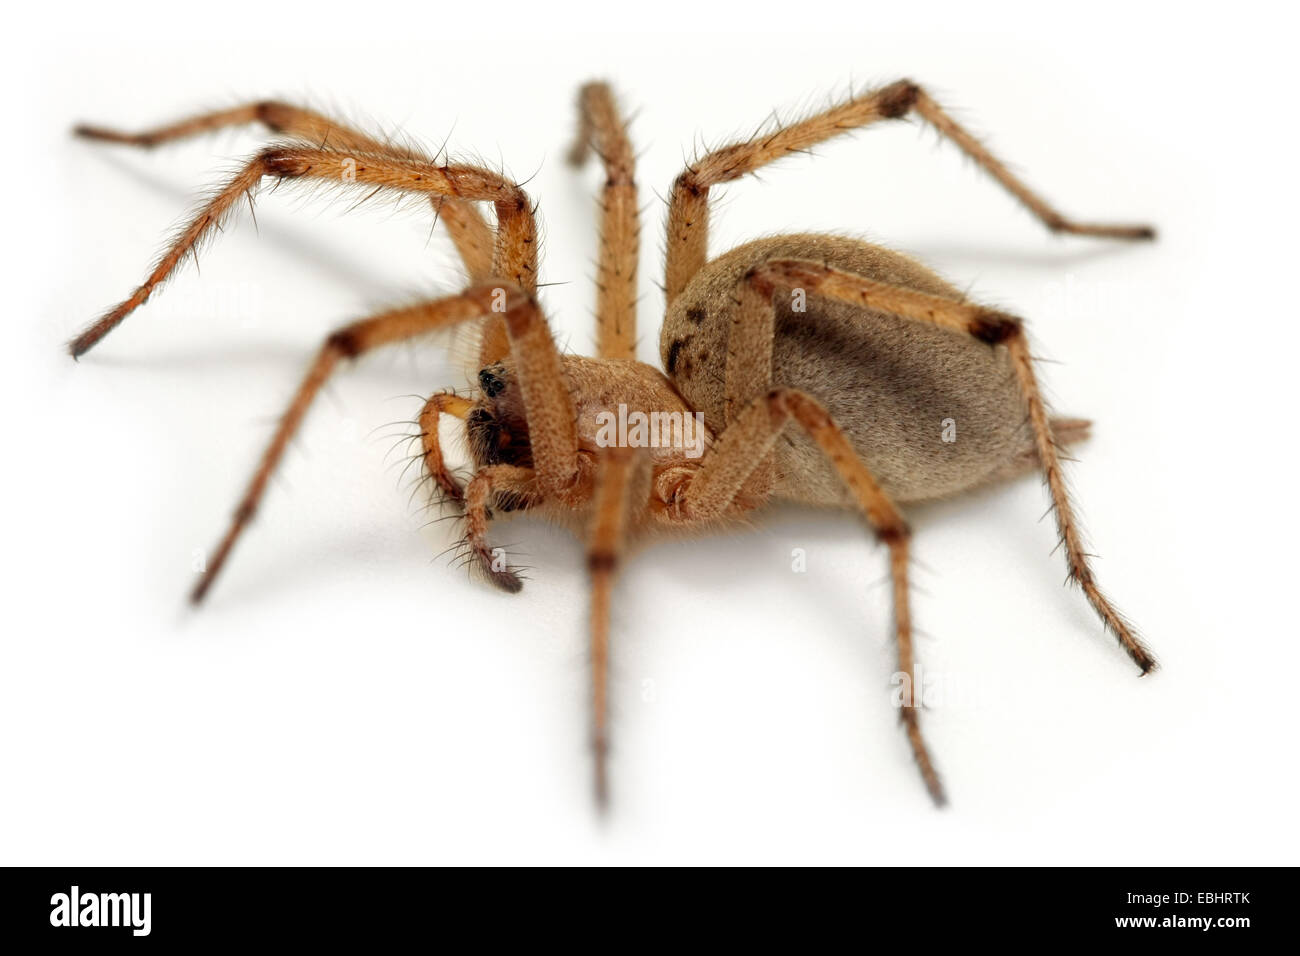 A female funnel web weaver (Agelena orientalis) on white background. Funnel weaving spiders are part of the family Agelenidae. Stock Photo